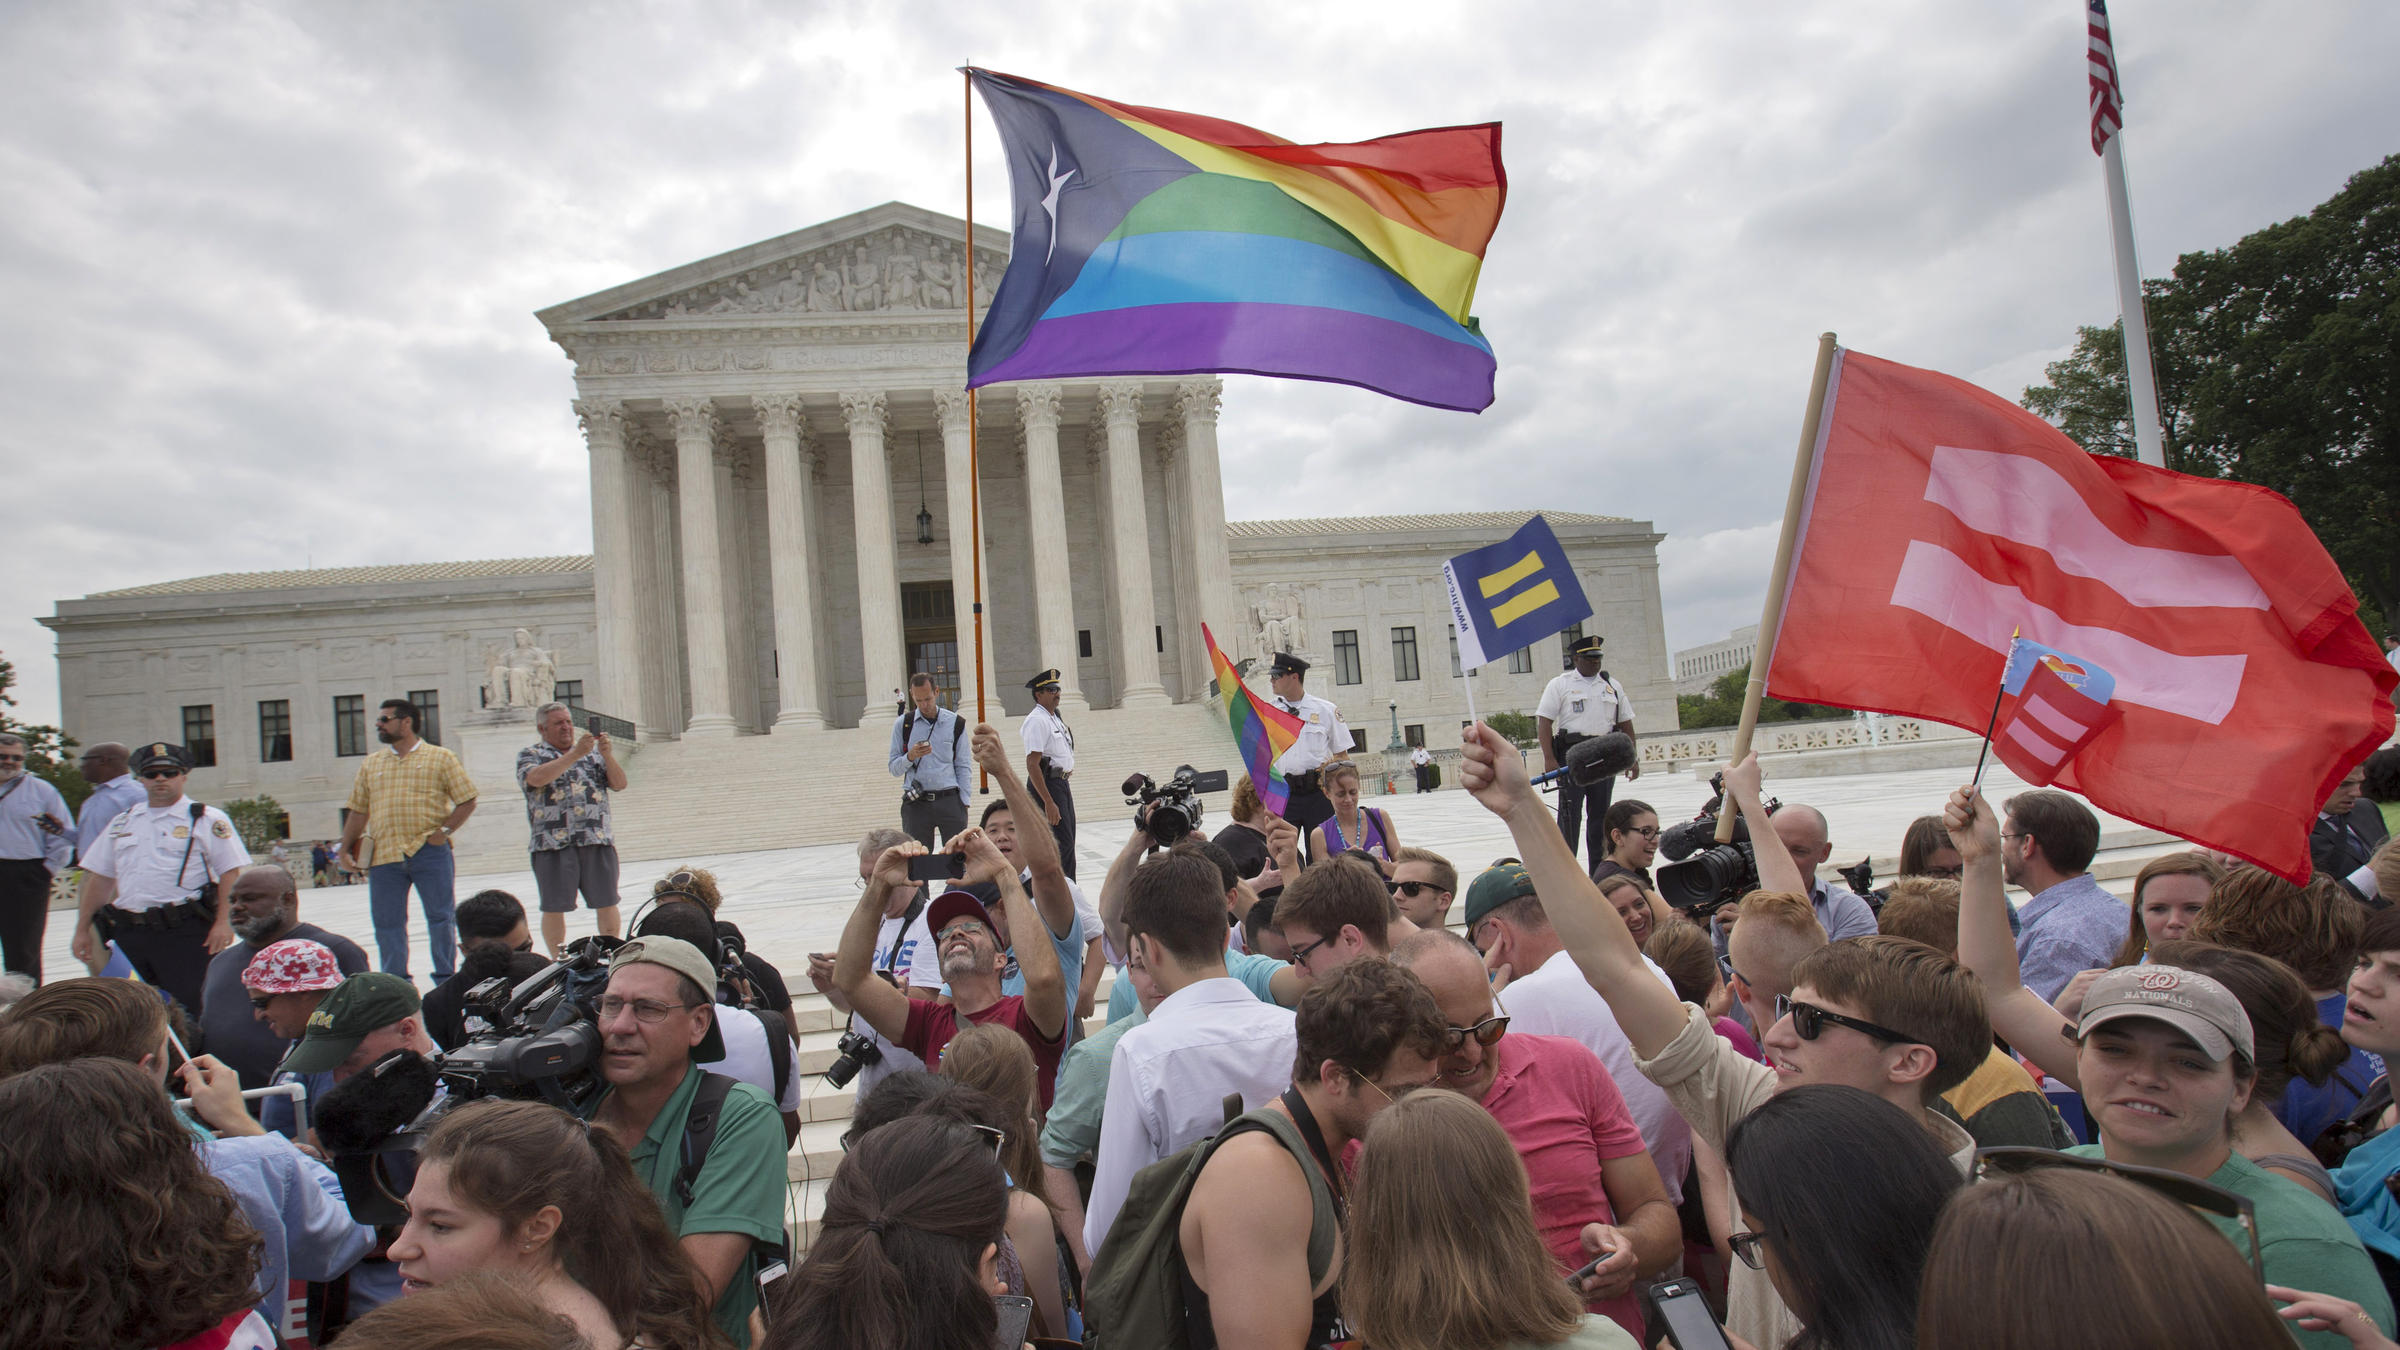 Supreme Court's Decision On SameSex Marriage Expected To Boost Health